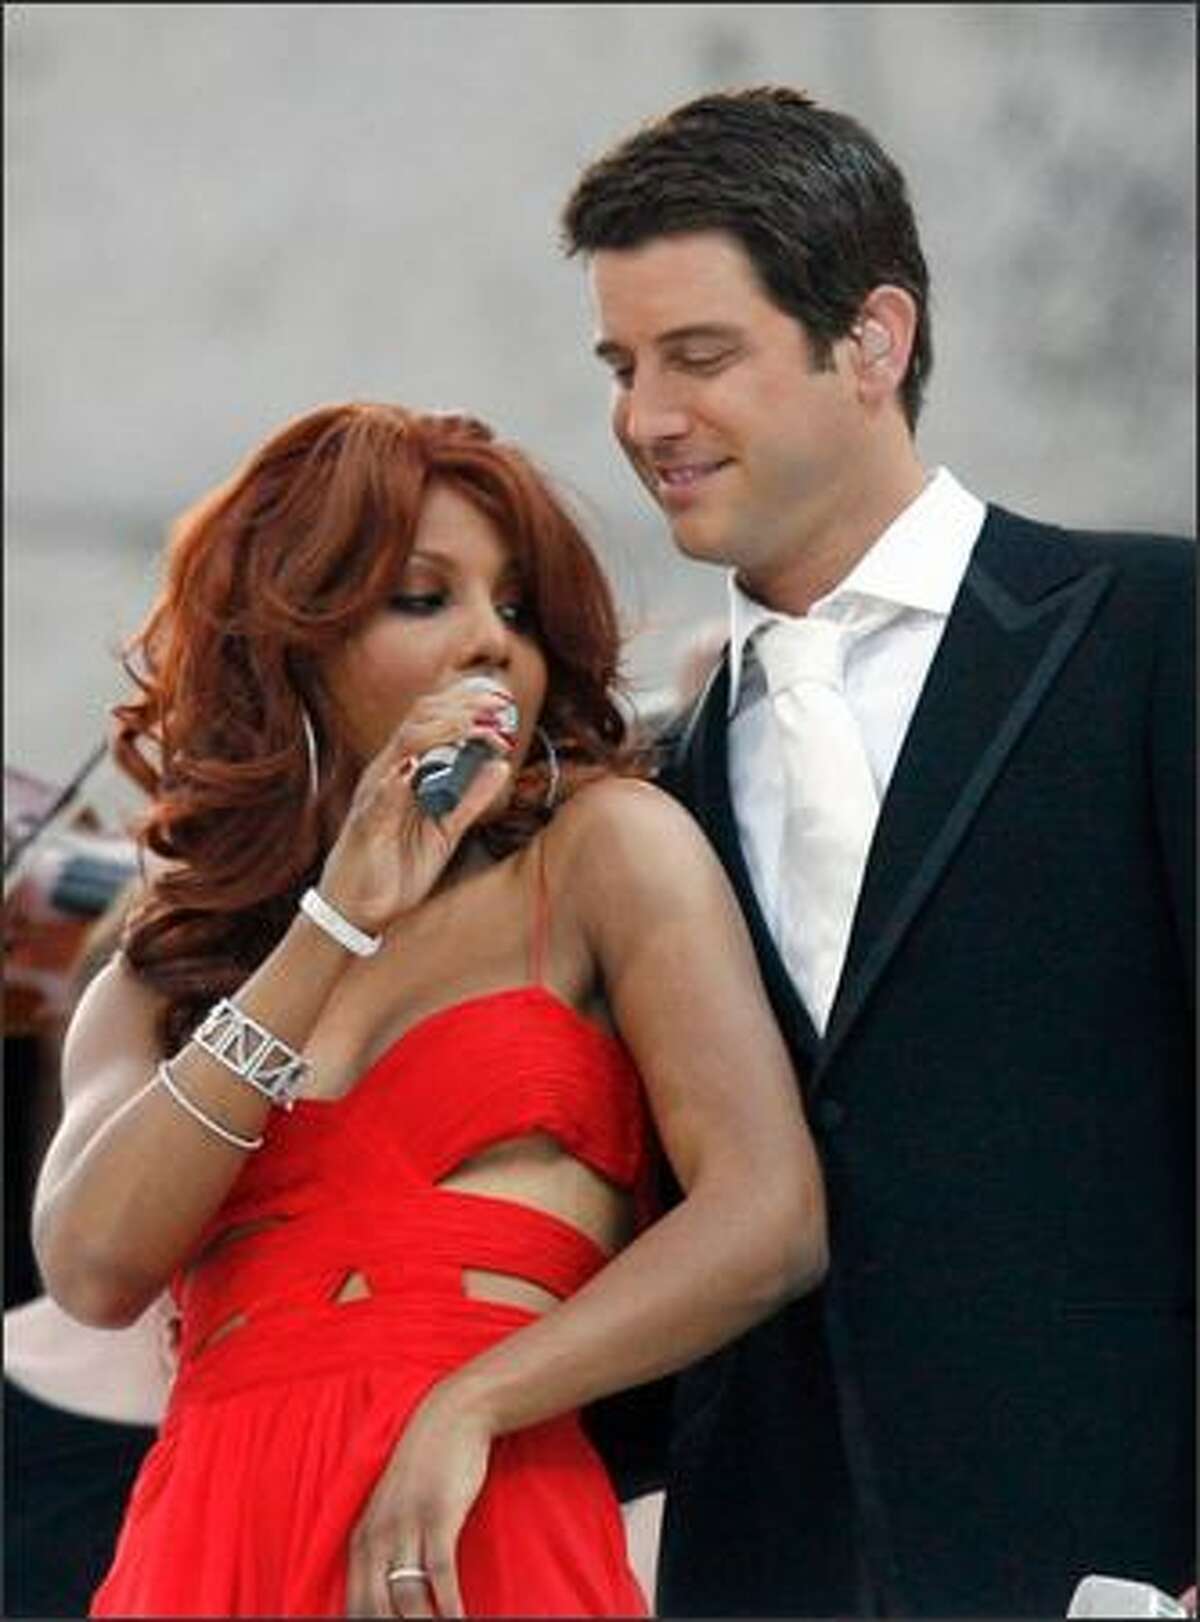 Looks as if Toni Braxton came perilously close to a wardrobe malfunction while singing in Berlin with Sebastian Izambard of the group Il Divo, during the closing ceremonies of soccer's World Cup on Sunday, but Europeans don't tend to get as panicky as Americans when a breast pops out of a garment.